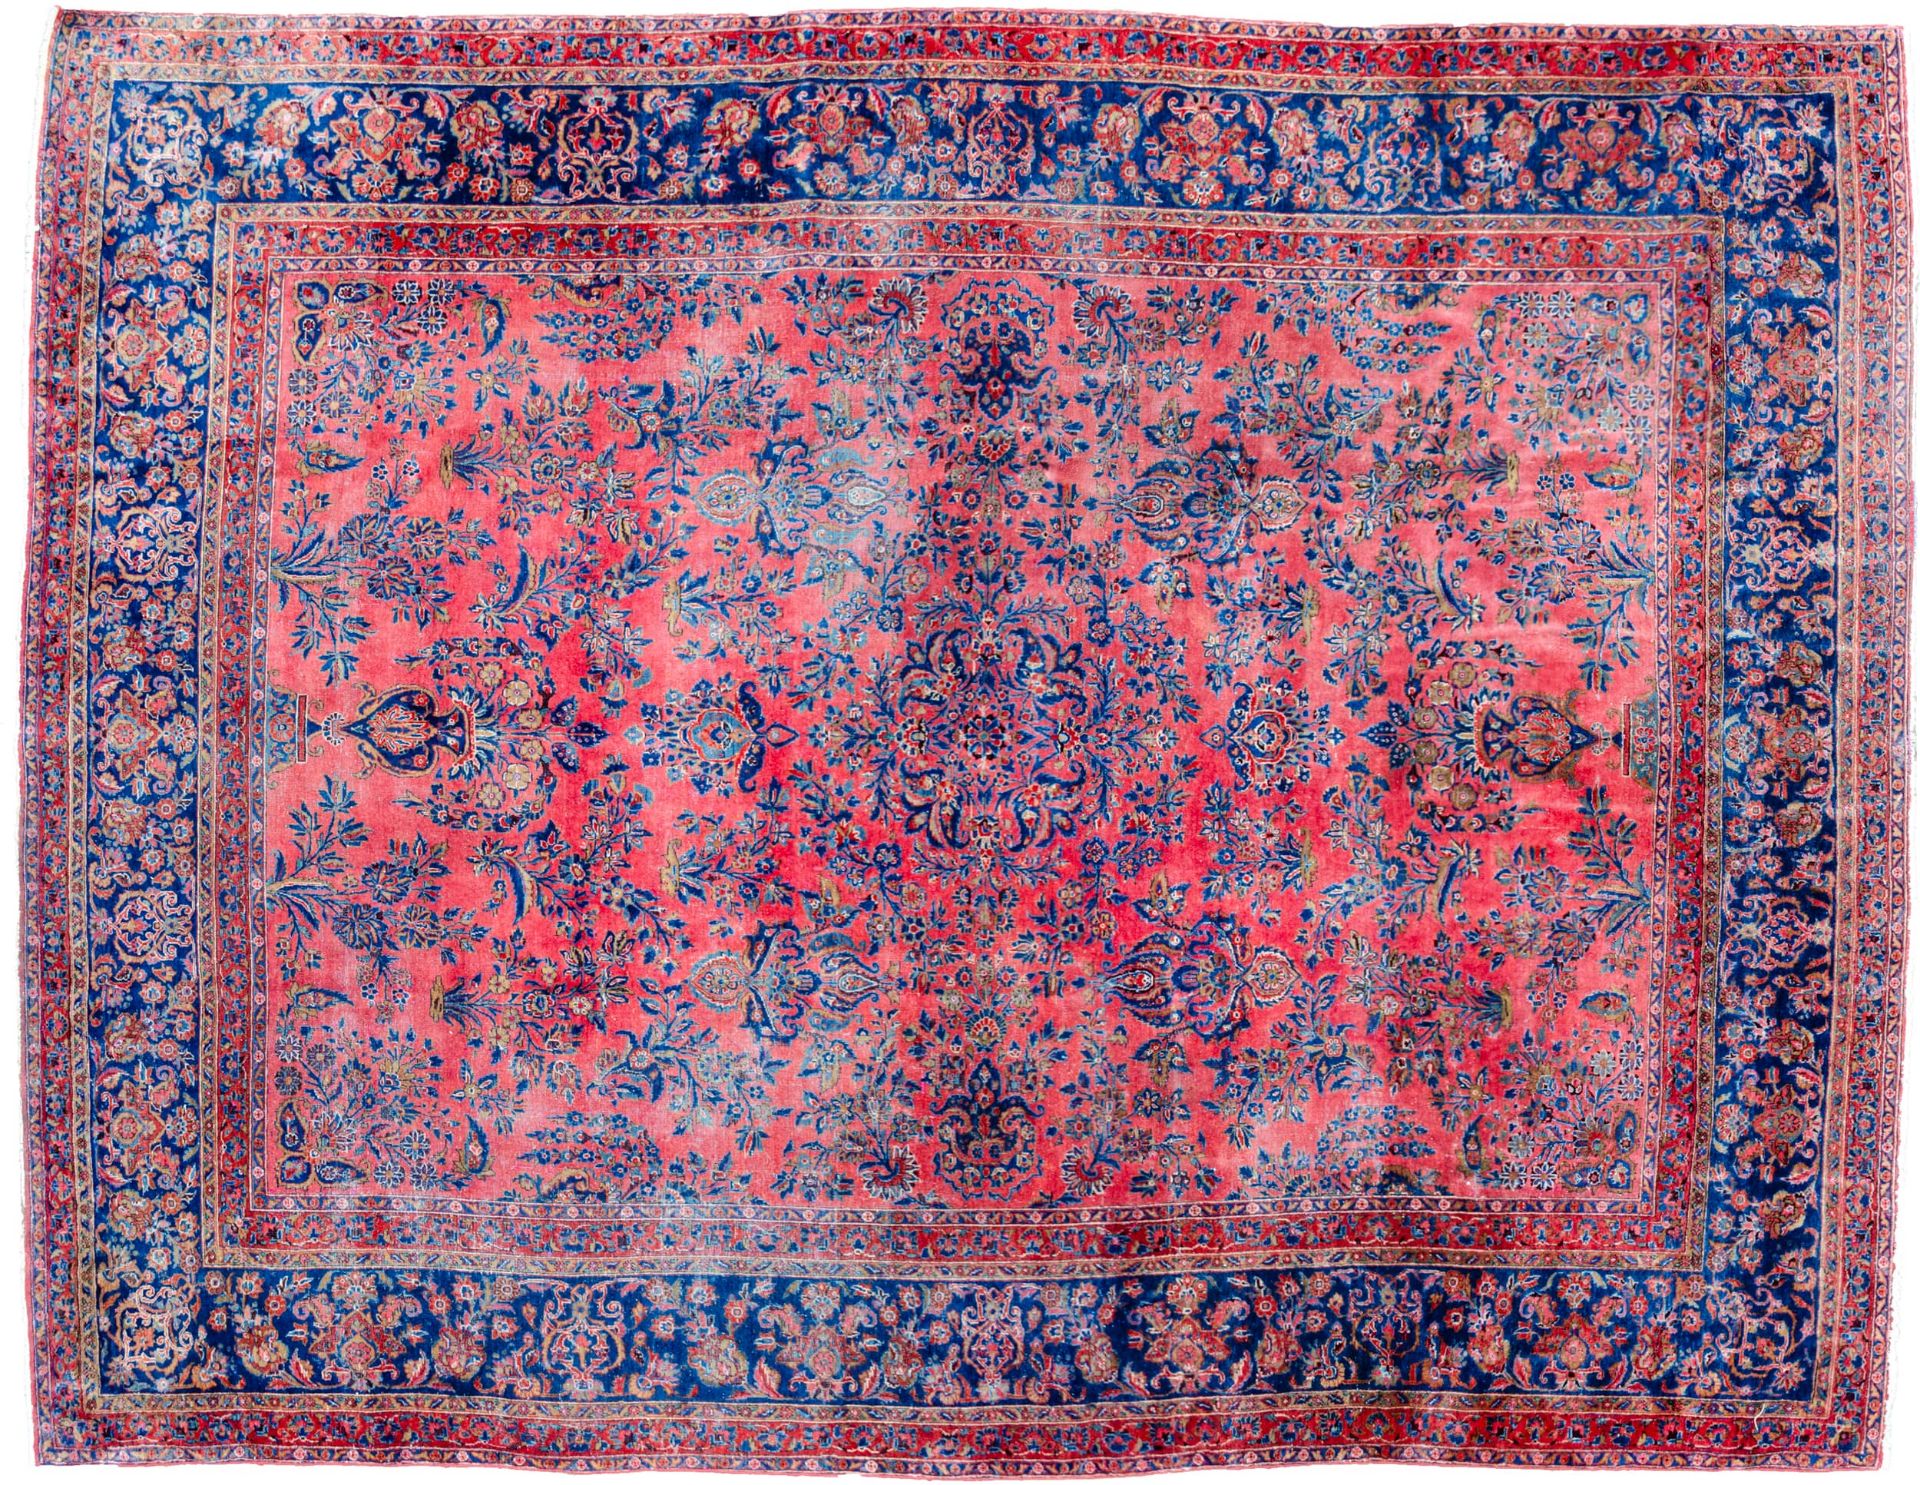 A Kashan carpet, Central Persia, 19th century - Image 2 of 7